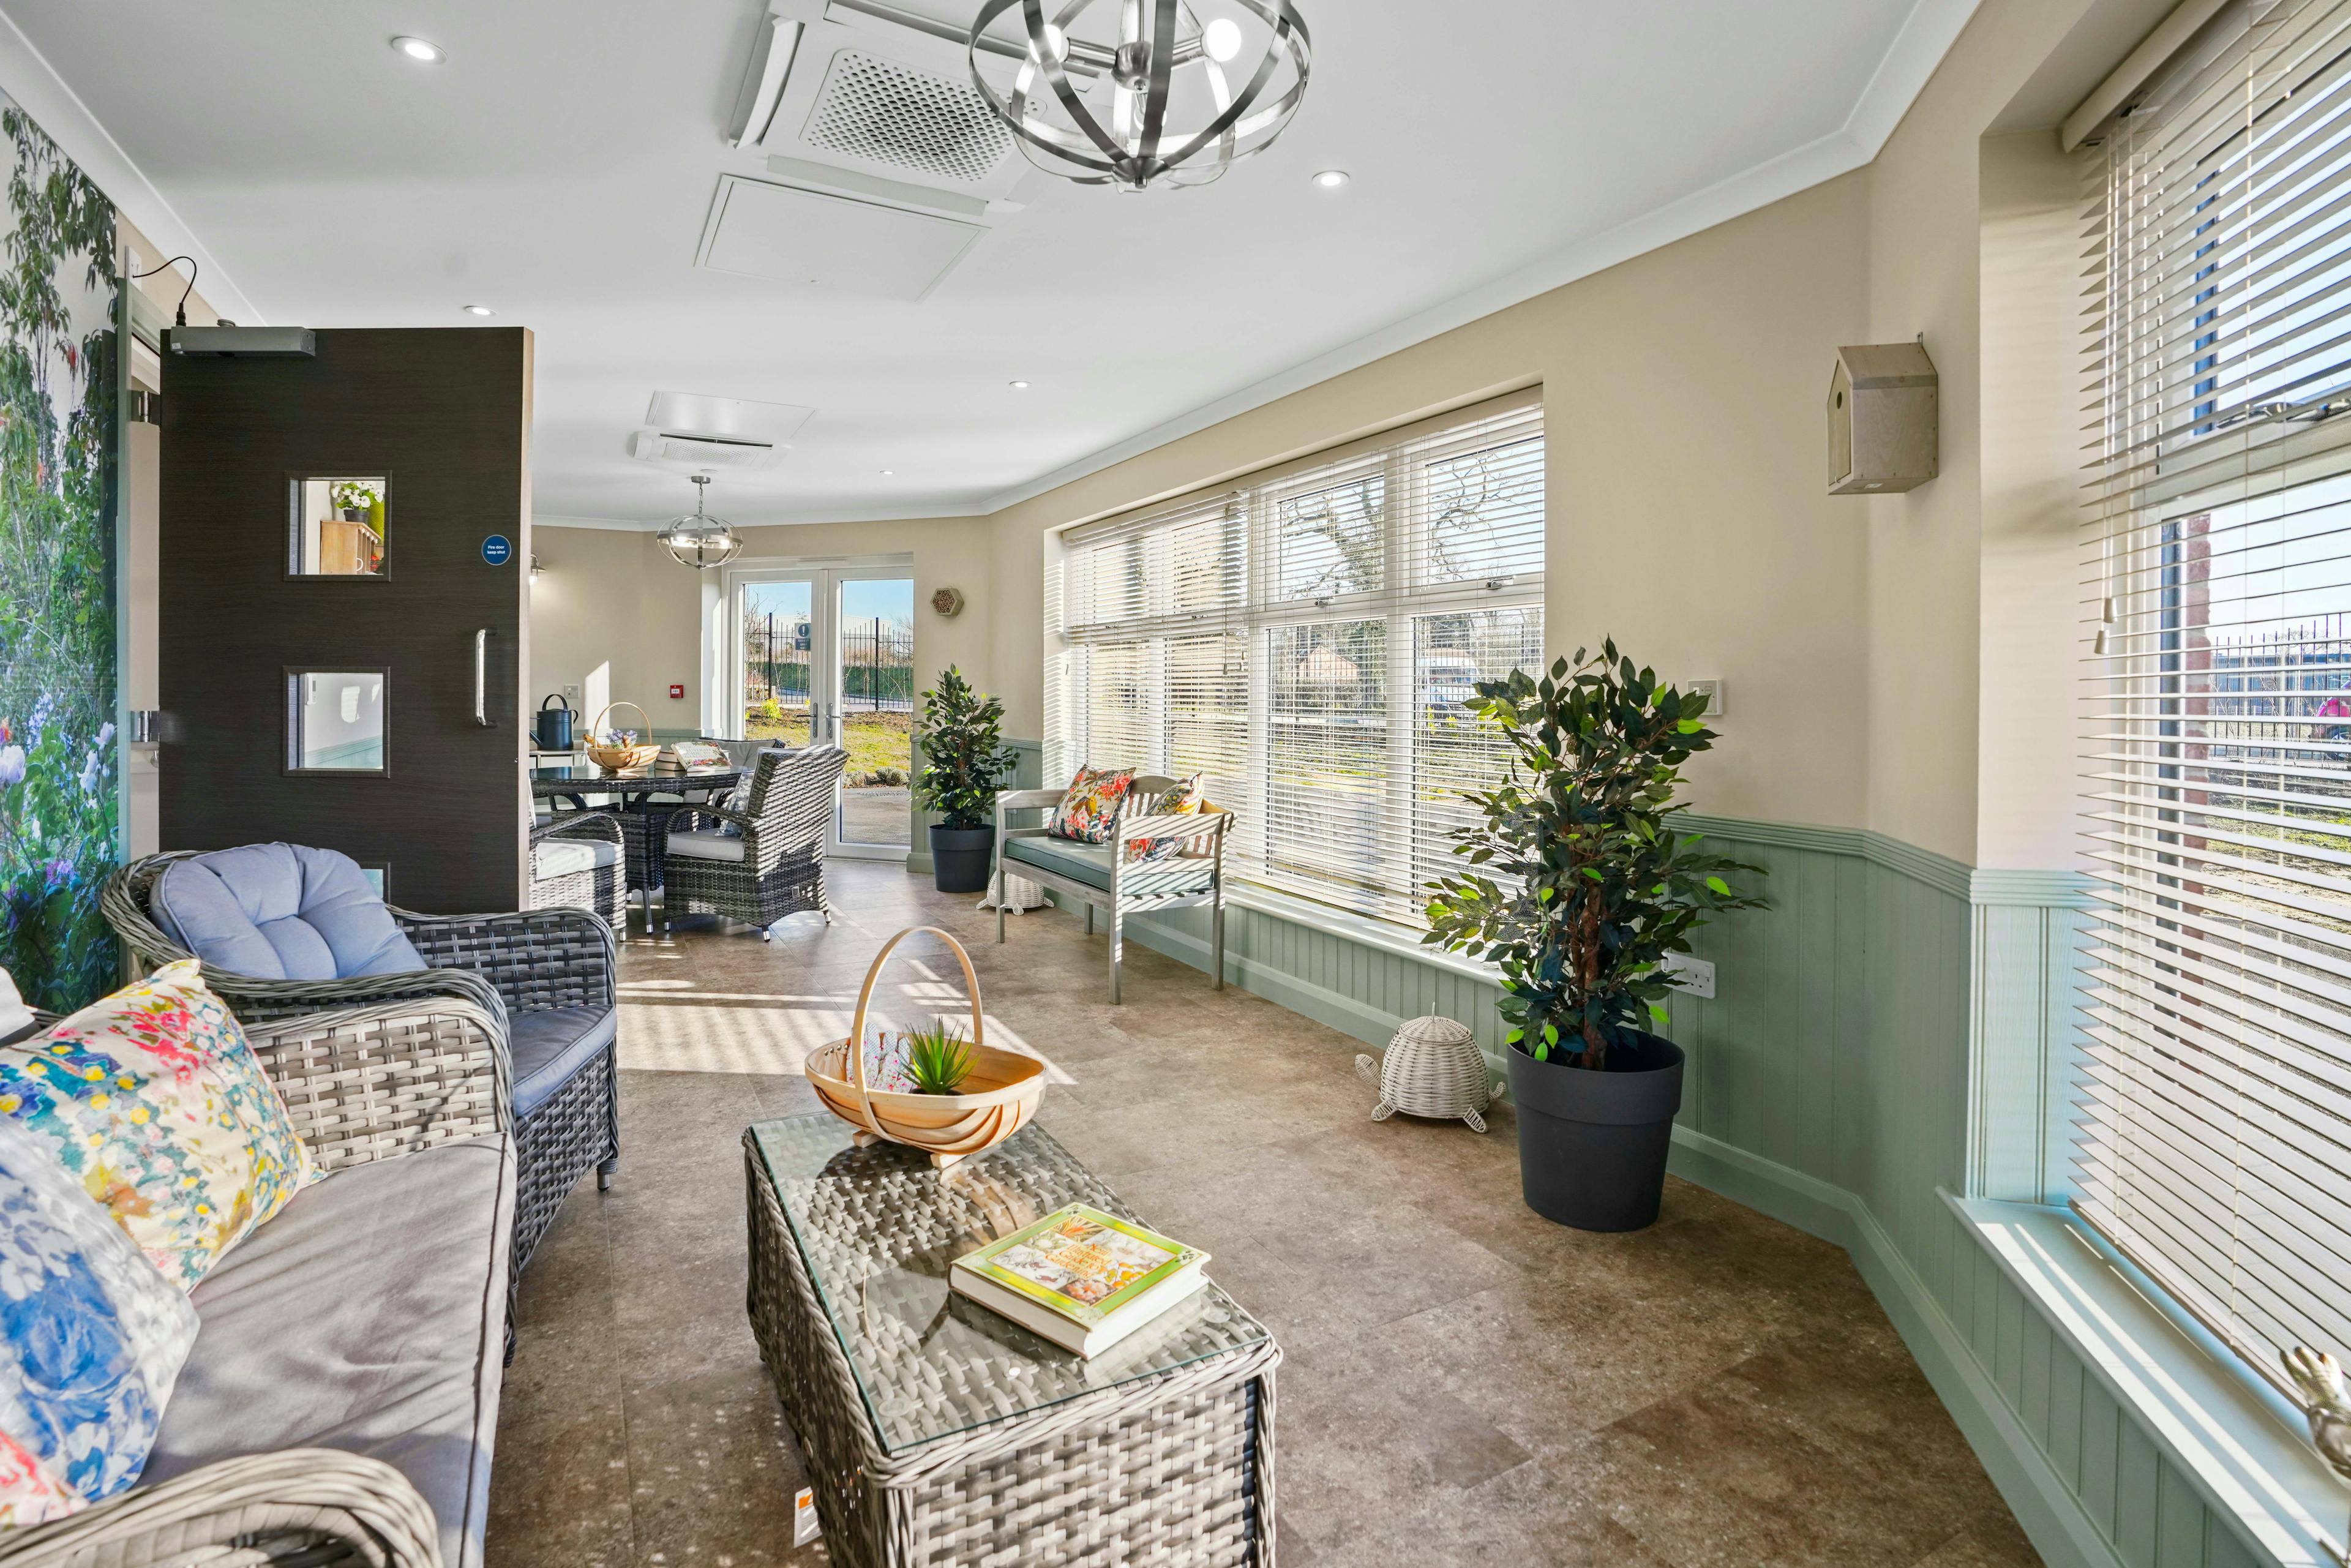 Garden room  of Tanglewood care home in Horncastle, Lincolnshire